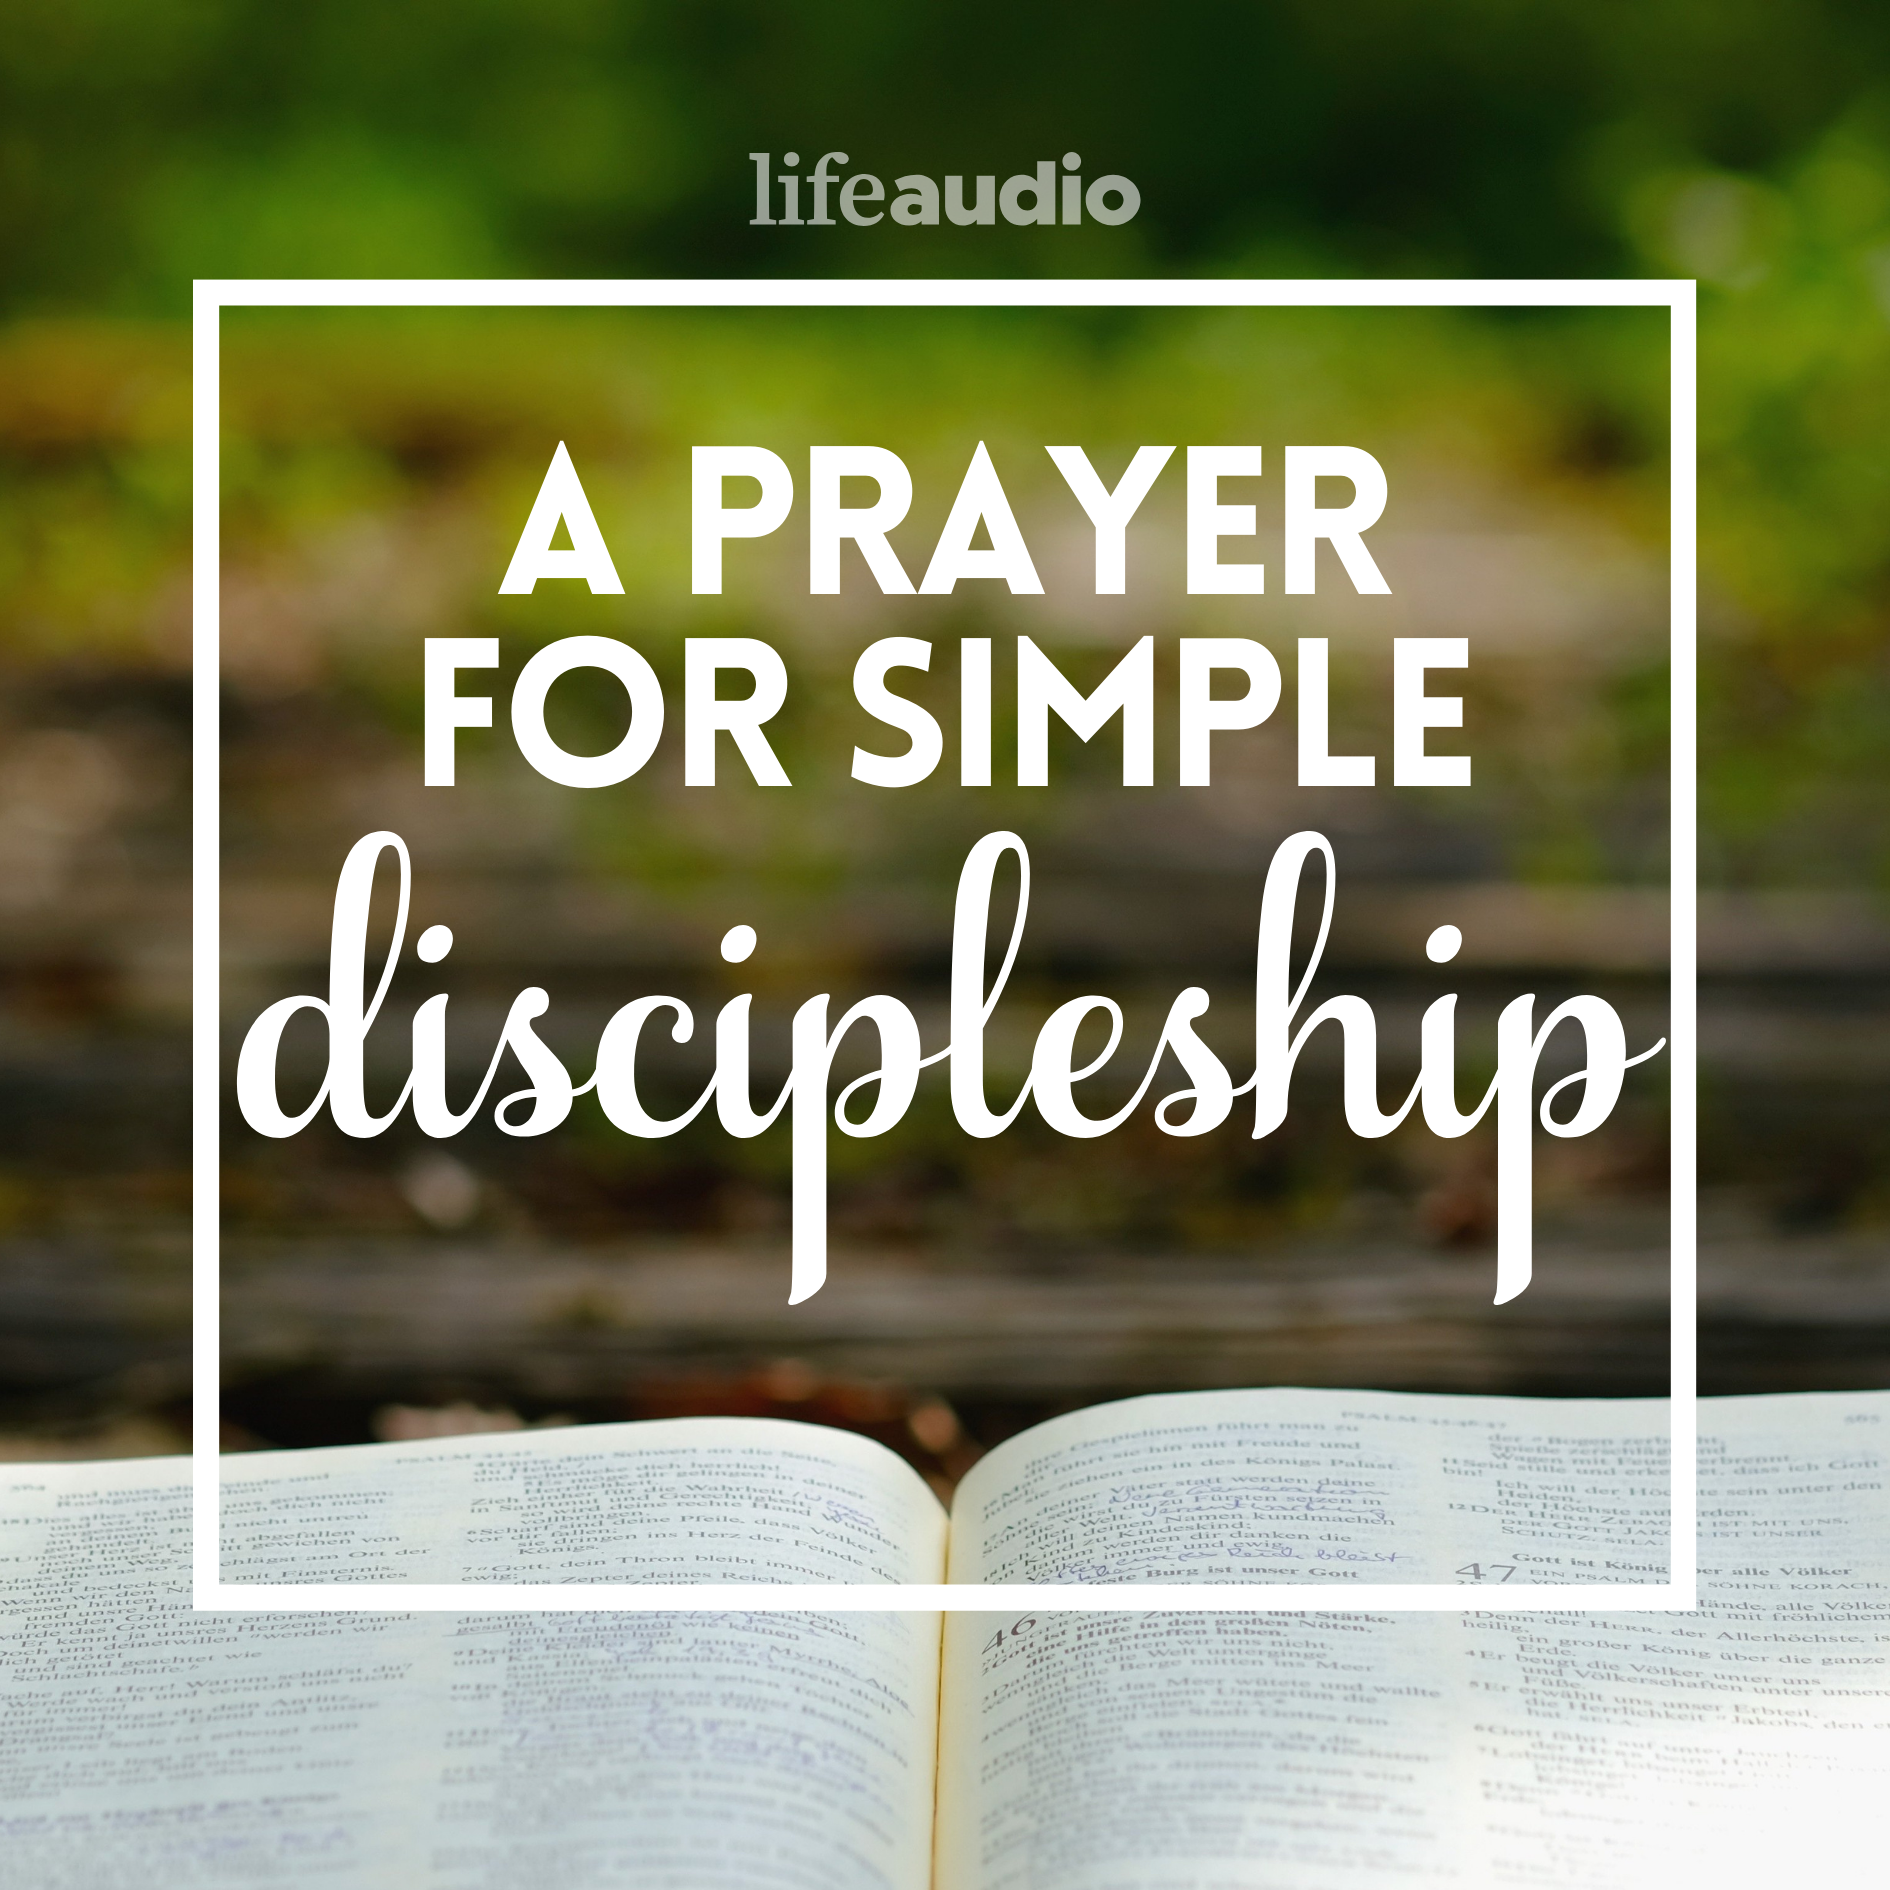 A Prayer for Simple Discipleship